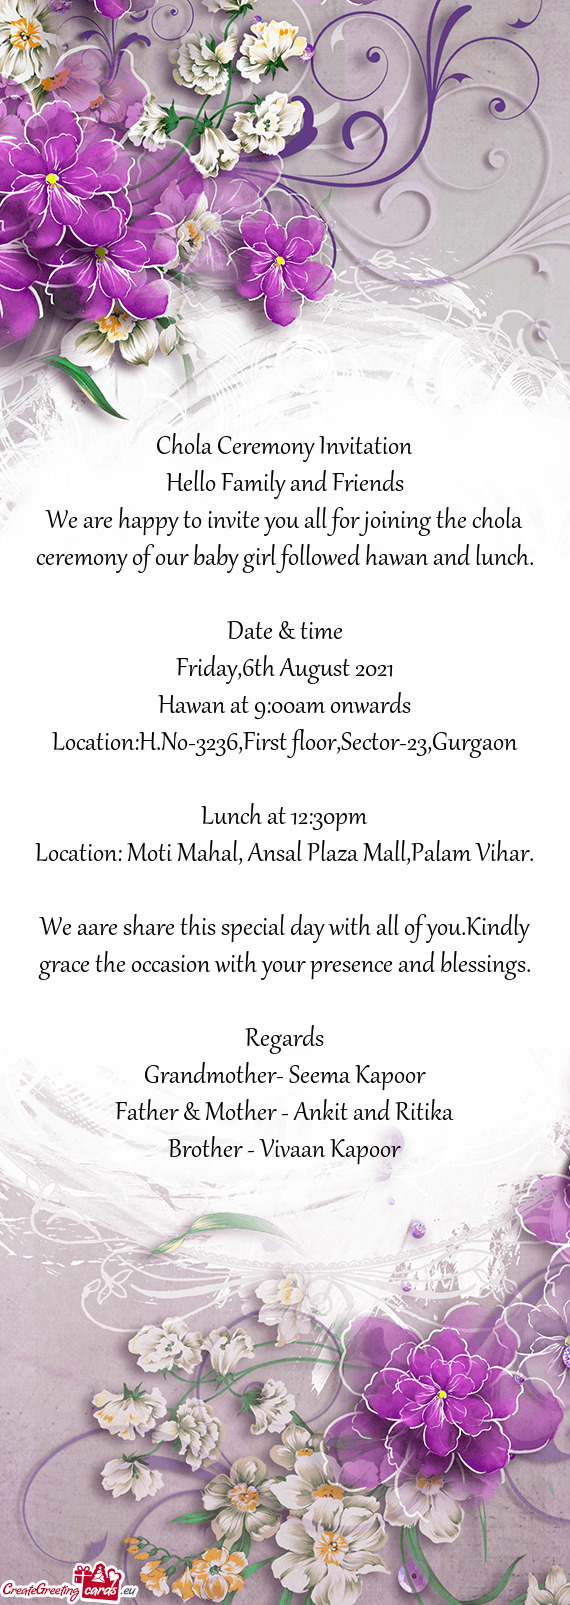 We are happy to invite you all for joining the chola ceremony of our baby girl followed hawan and lu